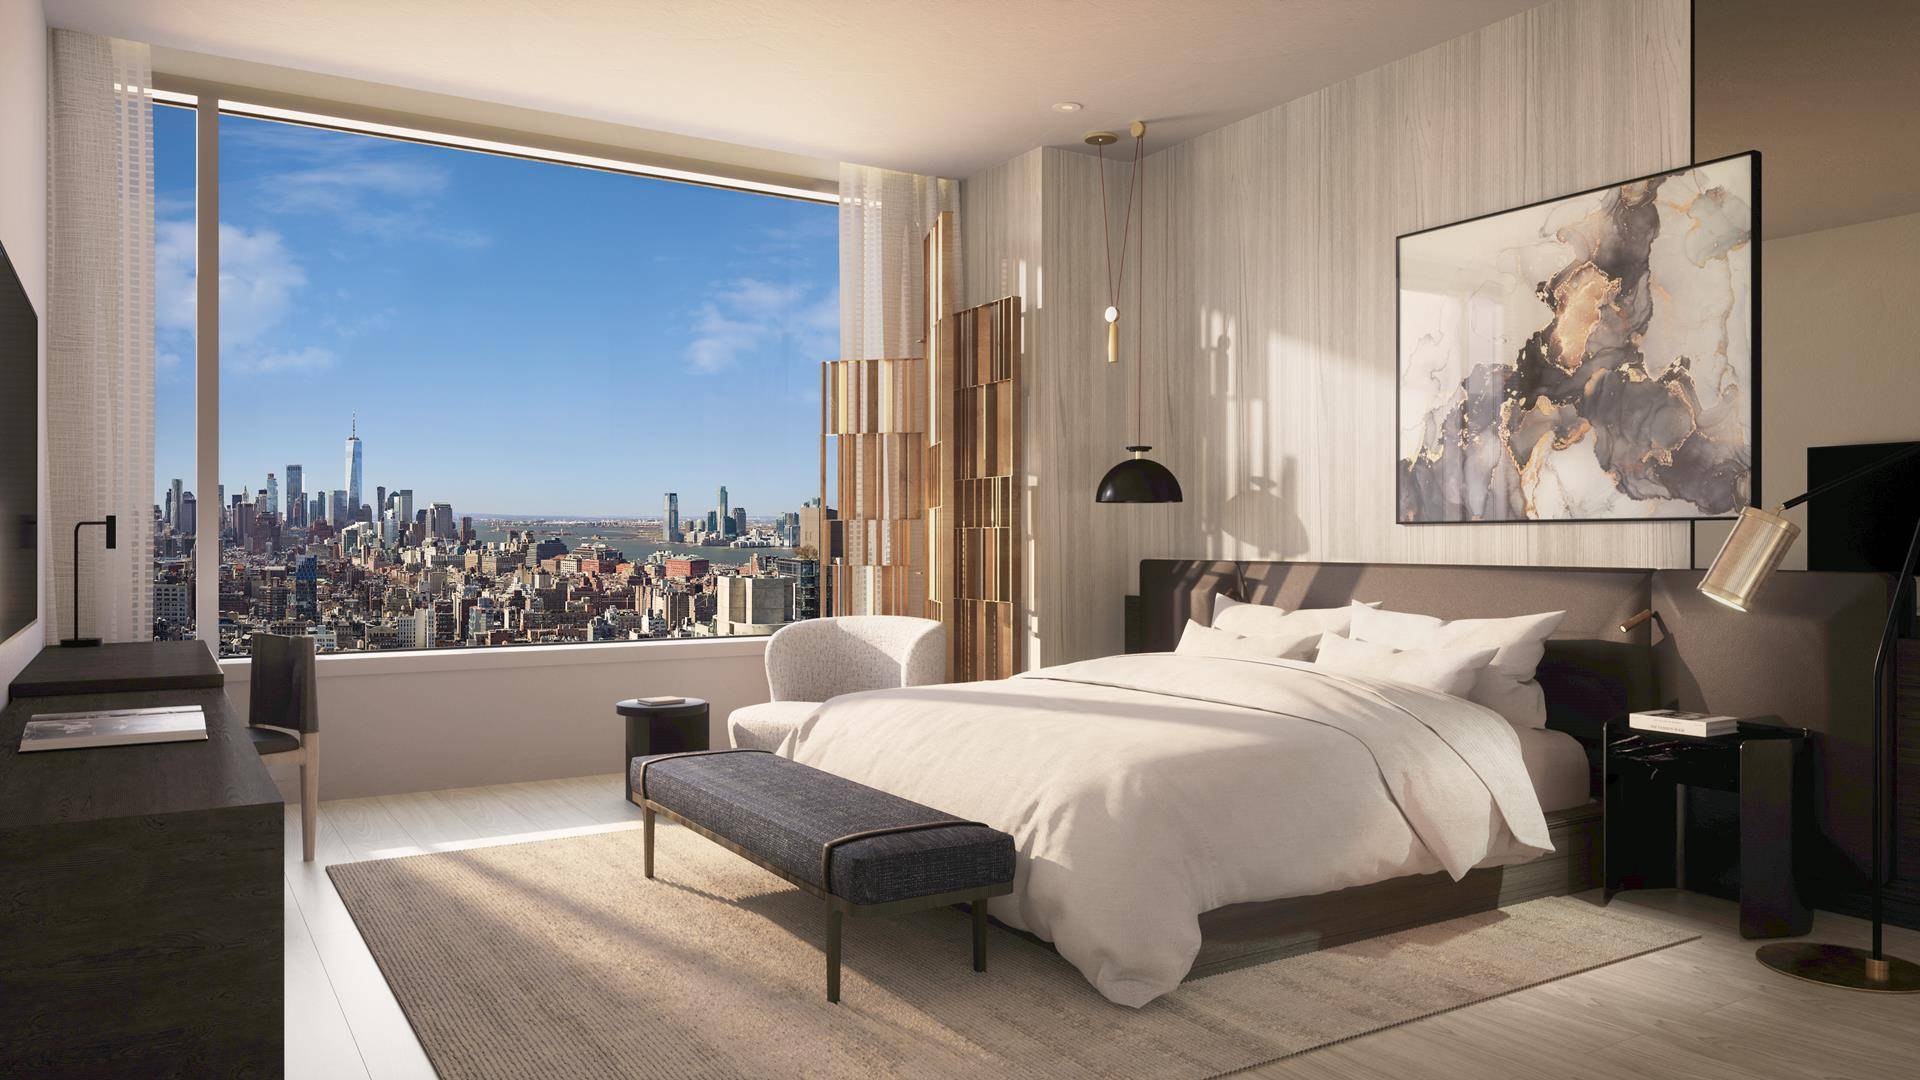 Soaring nearly 500 feet above Manhattan's iconic skyline, and at the very top of the newest tower by internationally acclaimed architect, Rafael Vinoly, PH 41C offers an extraordinary, high floor ...